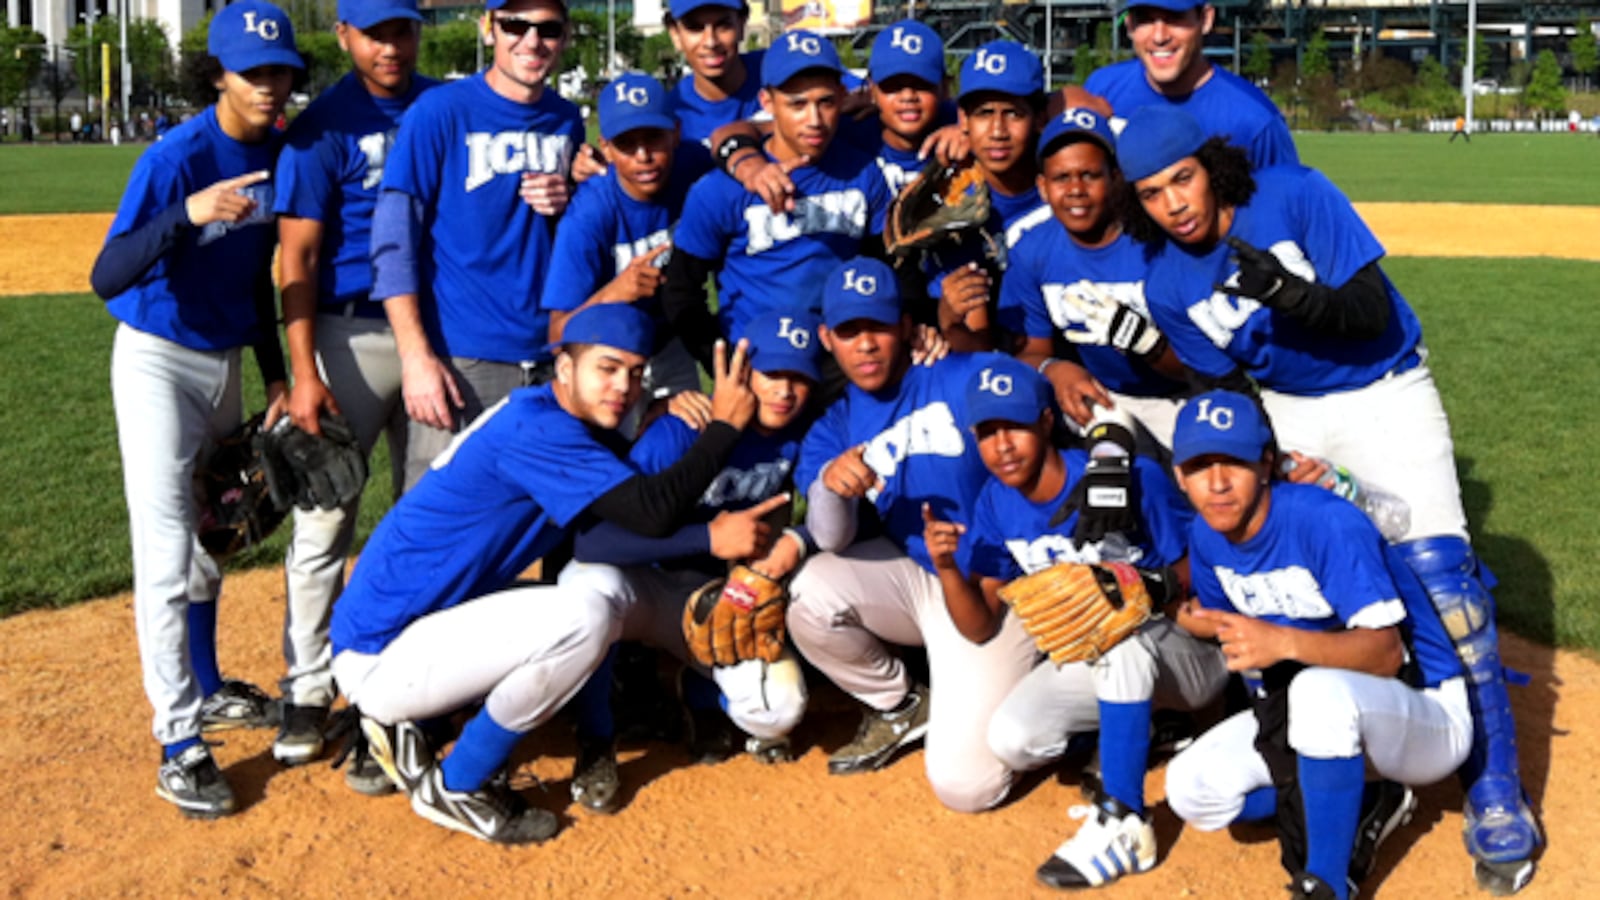 David Garcia-Rosen, pictured top left, poses with his International Community High School Baseball Team that he coaches through the Small Schools Athletic League.